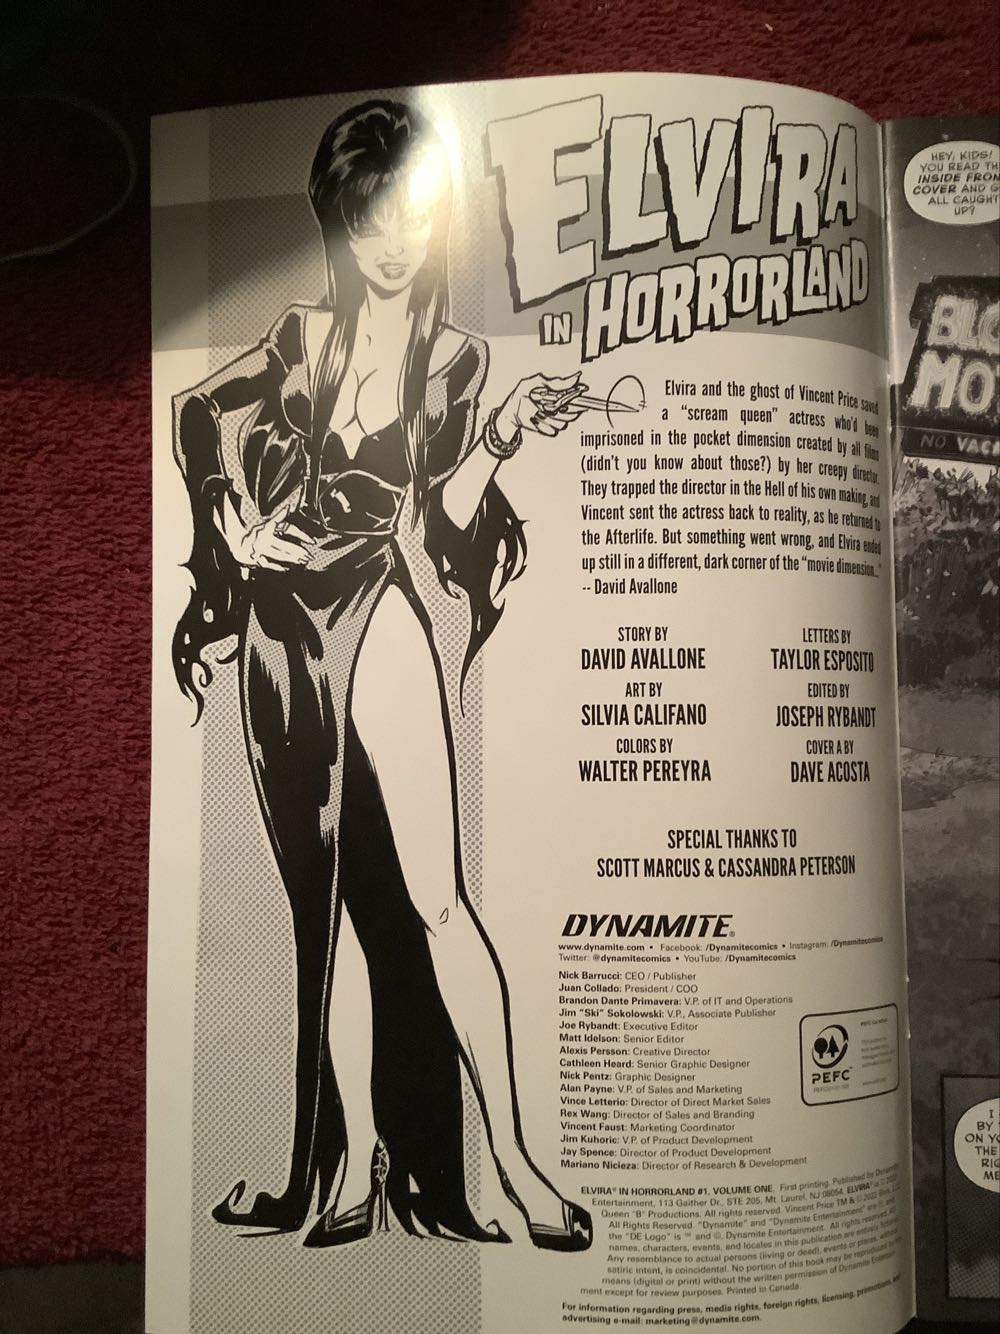 Elvira In Horrorland #1 (Cover D) - Dynamite Entertainement (1 - May 2022) comic book collectible [Barcode 72513031949401041] - Main Image 2